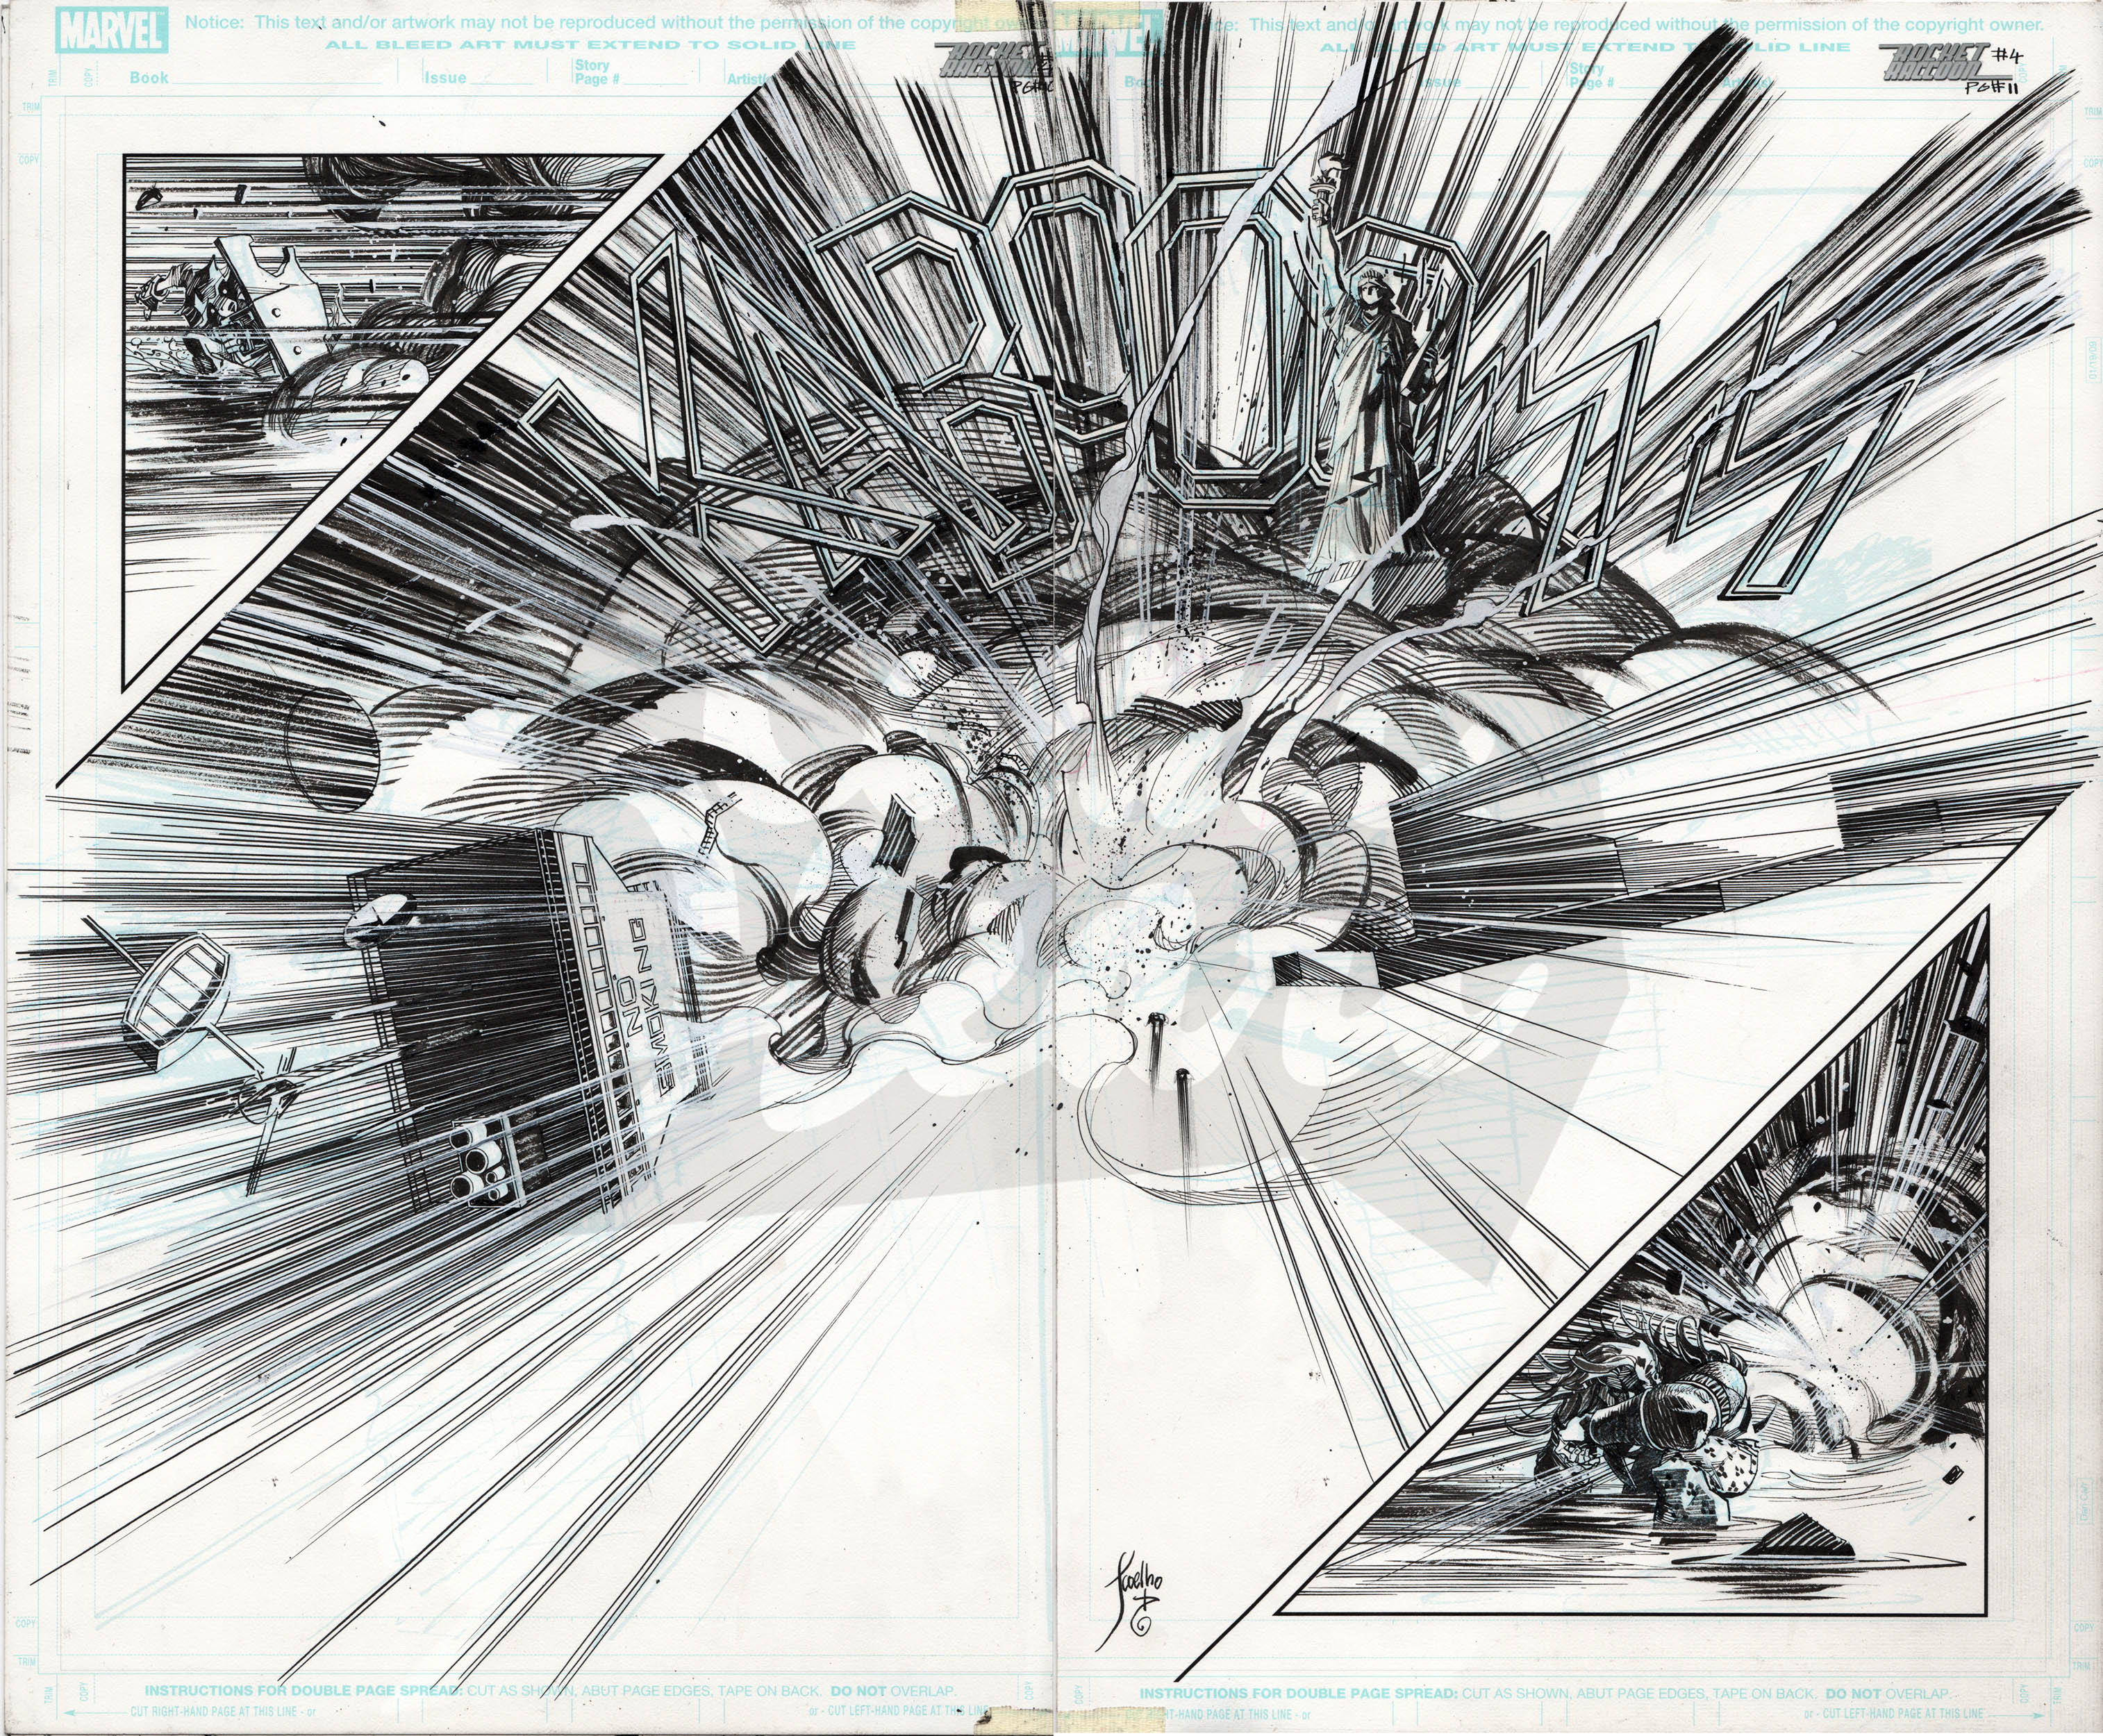 Rocket Raccoon #4, Pages 10-11 (double page spread)